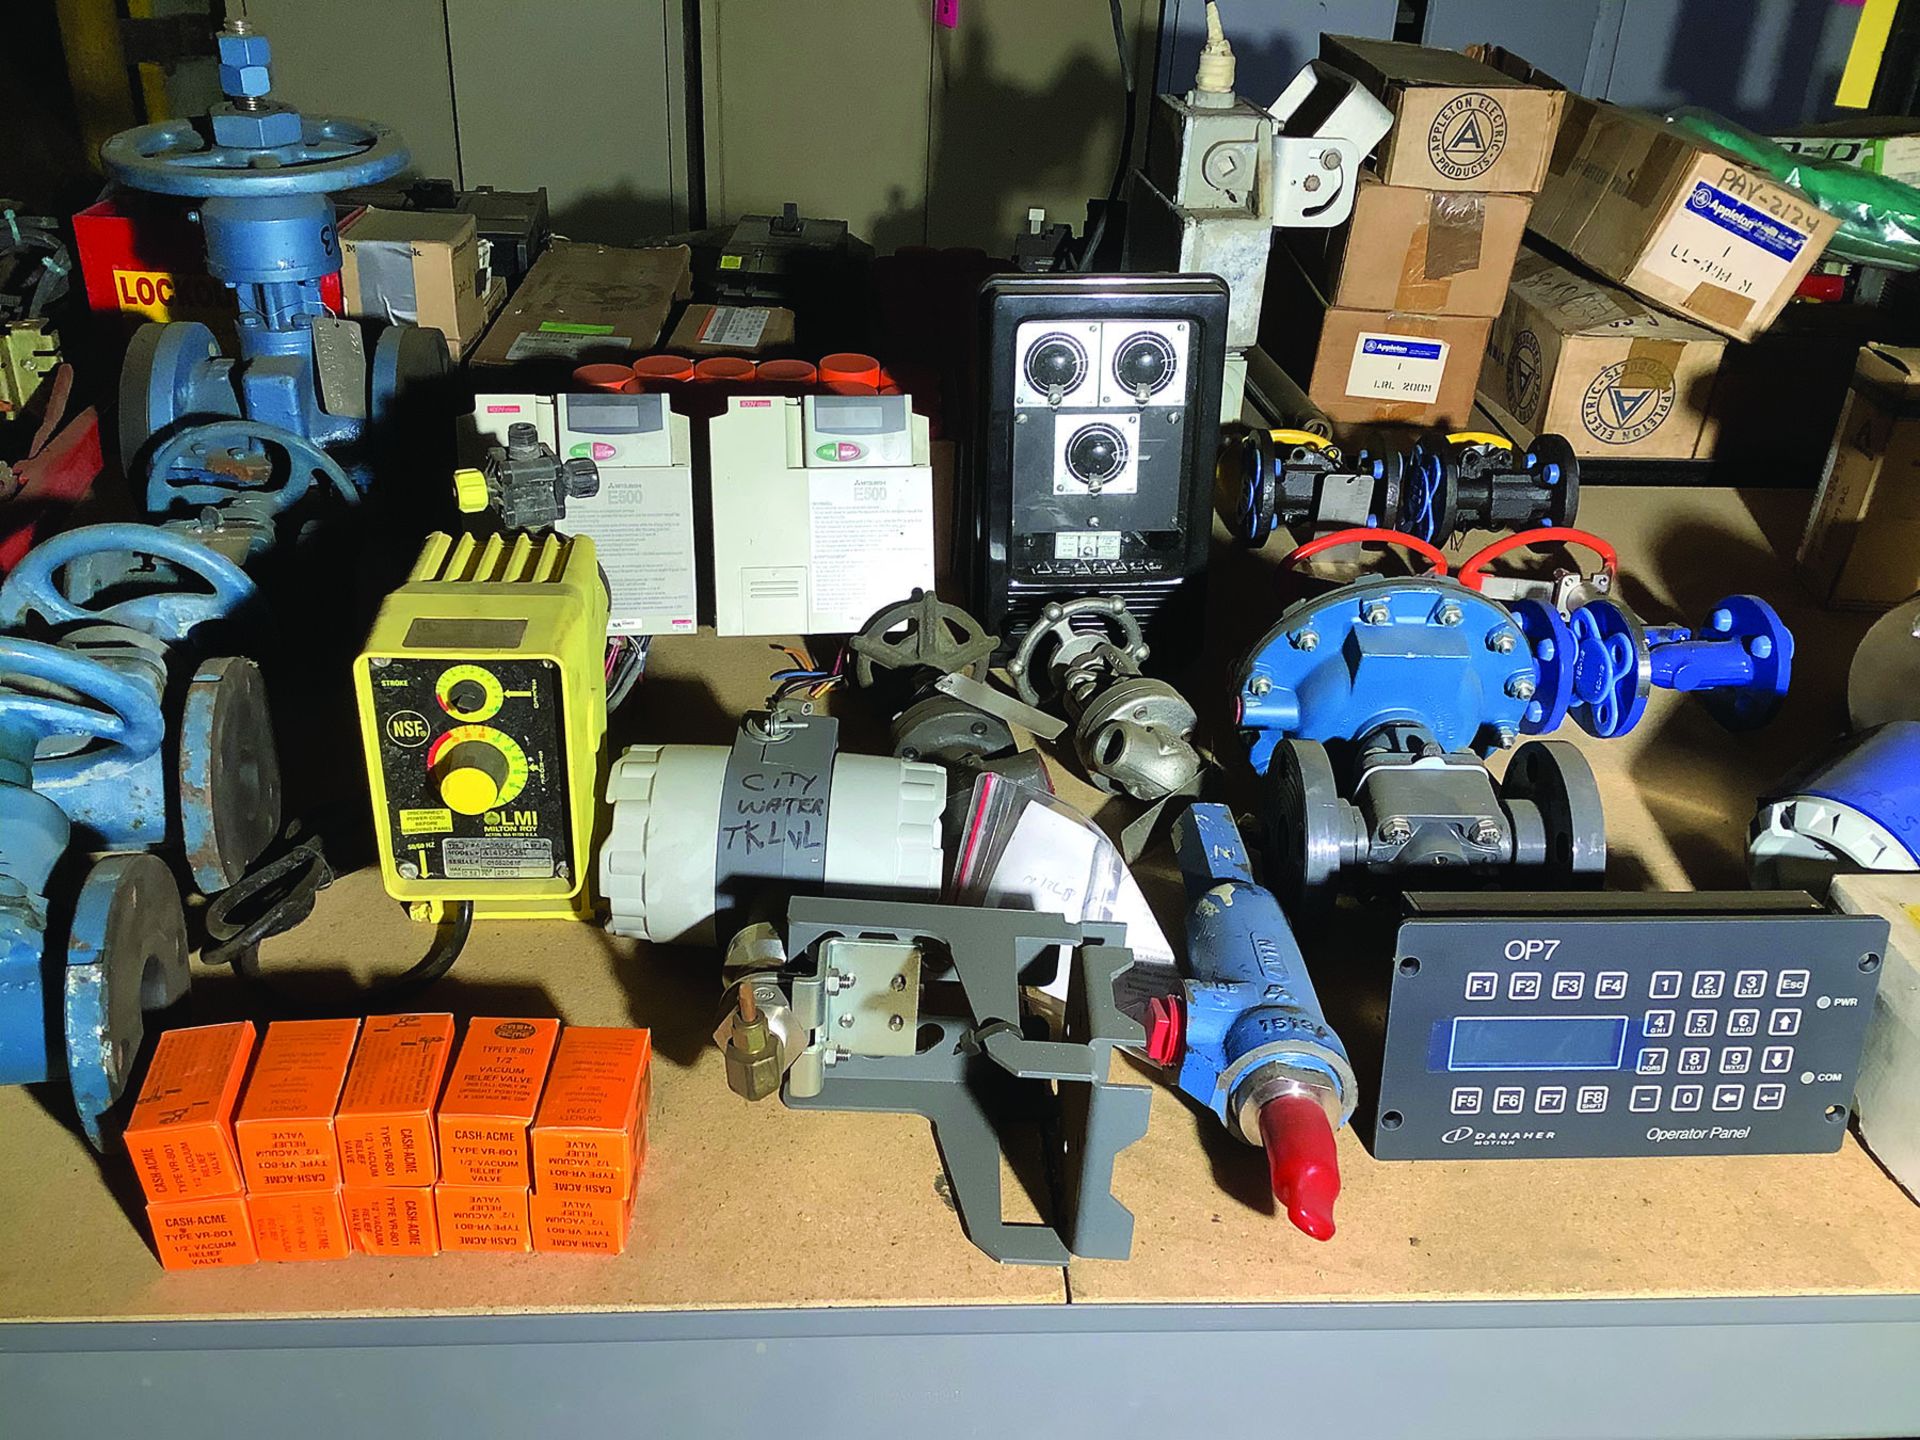 SHELVES OF MISCELLANEOUS MRO, VALVES, ELECTRICAL, ETC. - Image 3 of 4